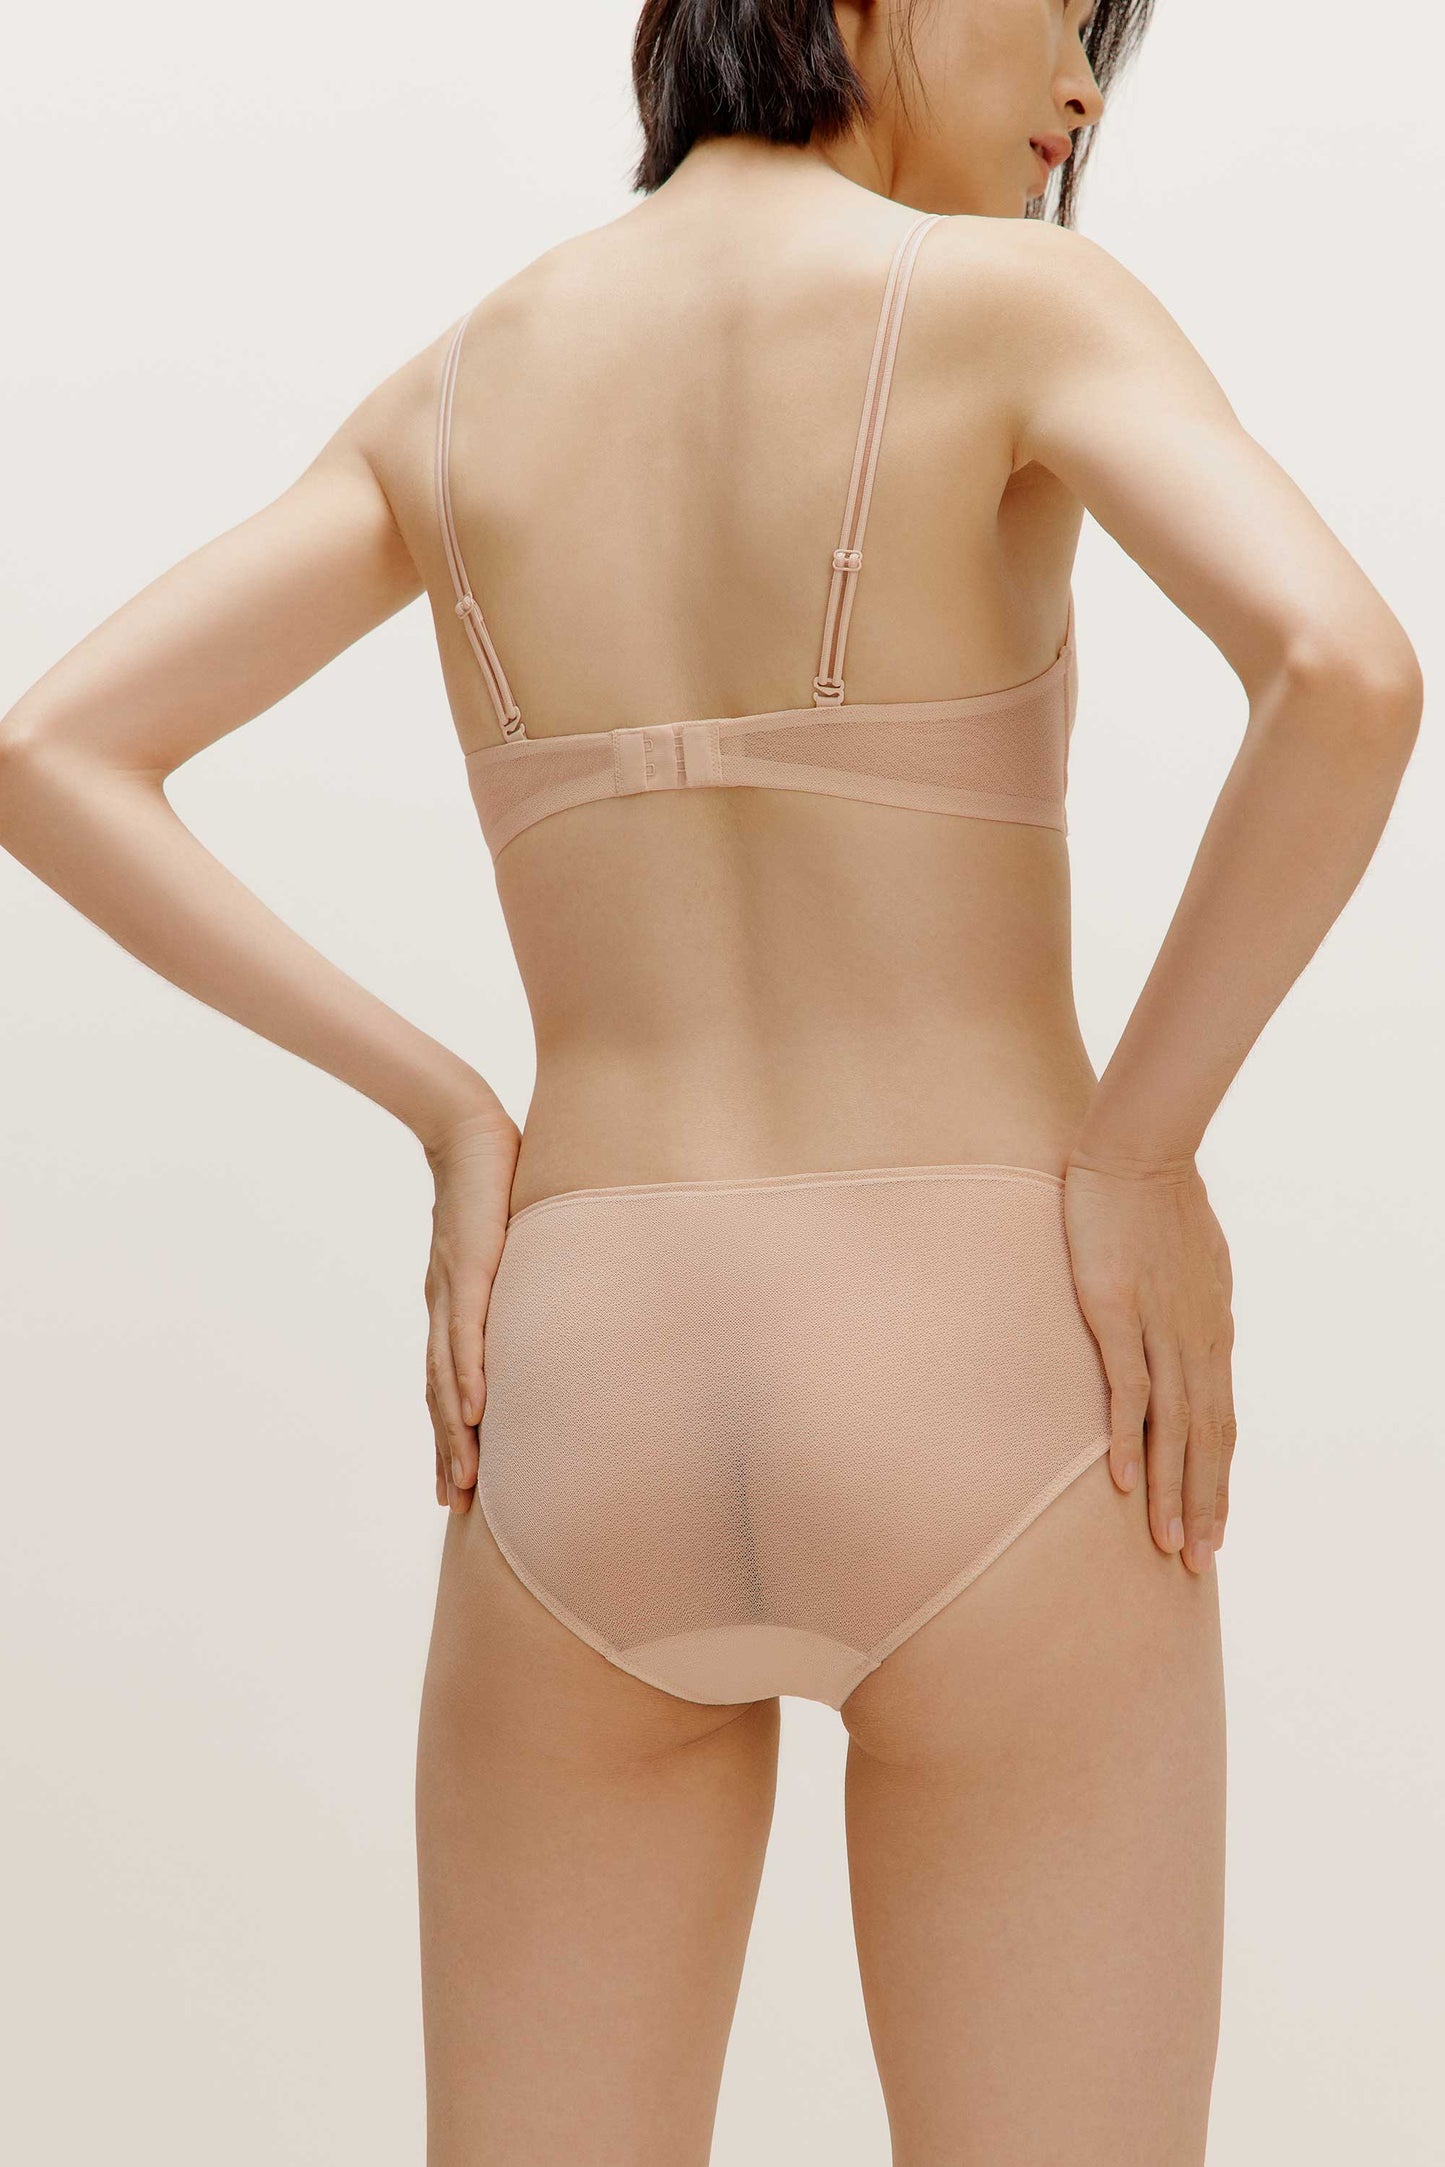 back of a woman wearing a nude Crossover Low Waist Brief and nude bra